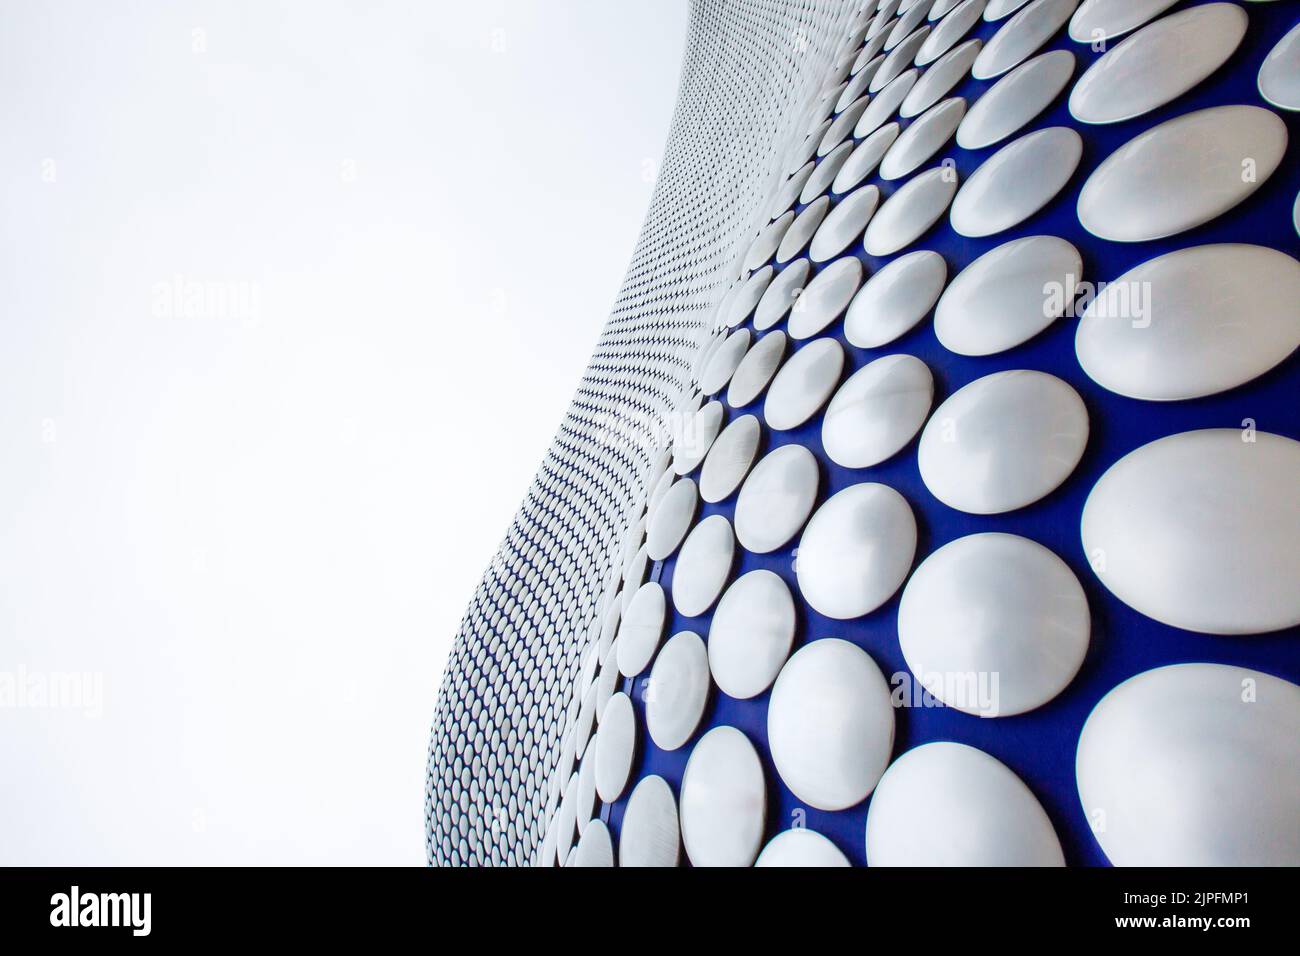 Abstract architecture of the metal disc cladding on the exterior of the Selfridges building at Birmingham Bullring shopping centre Stock Photo